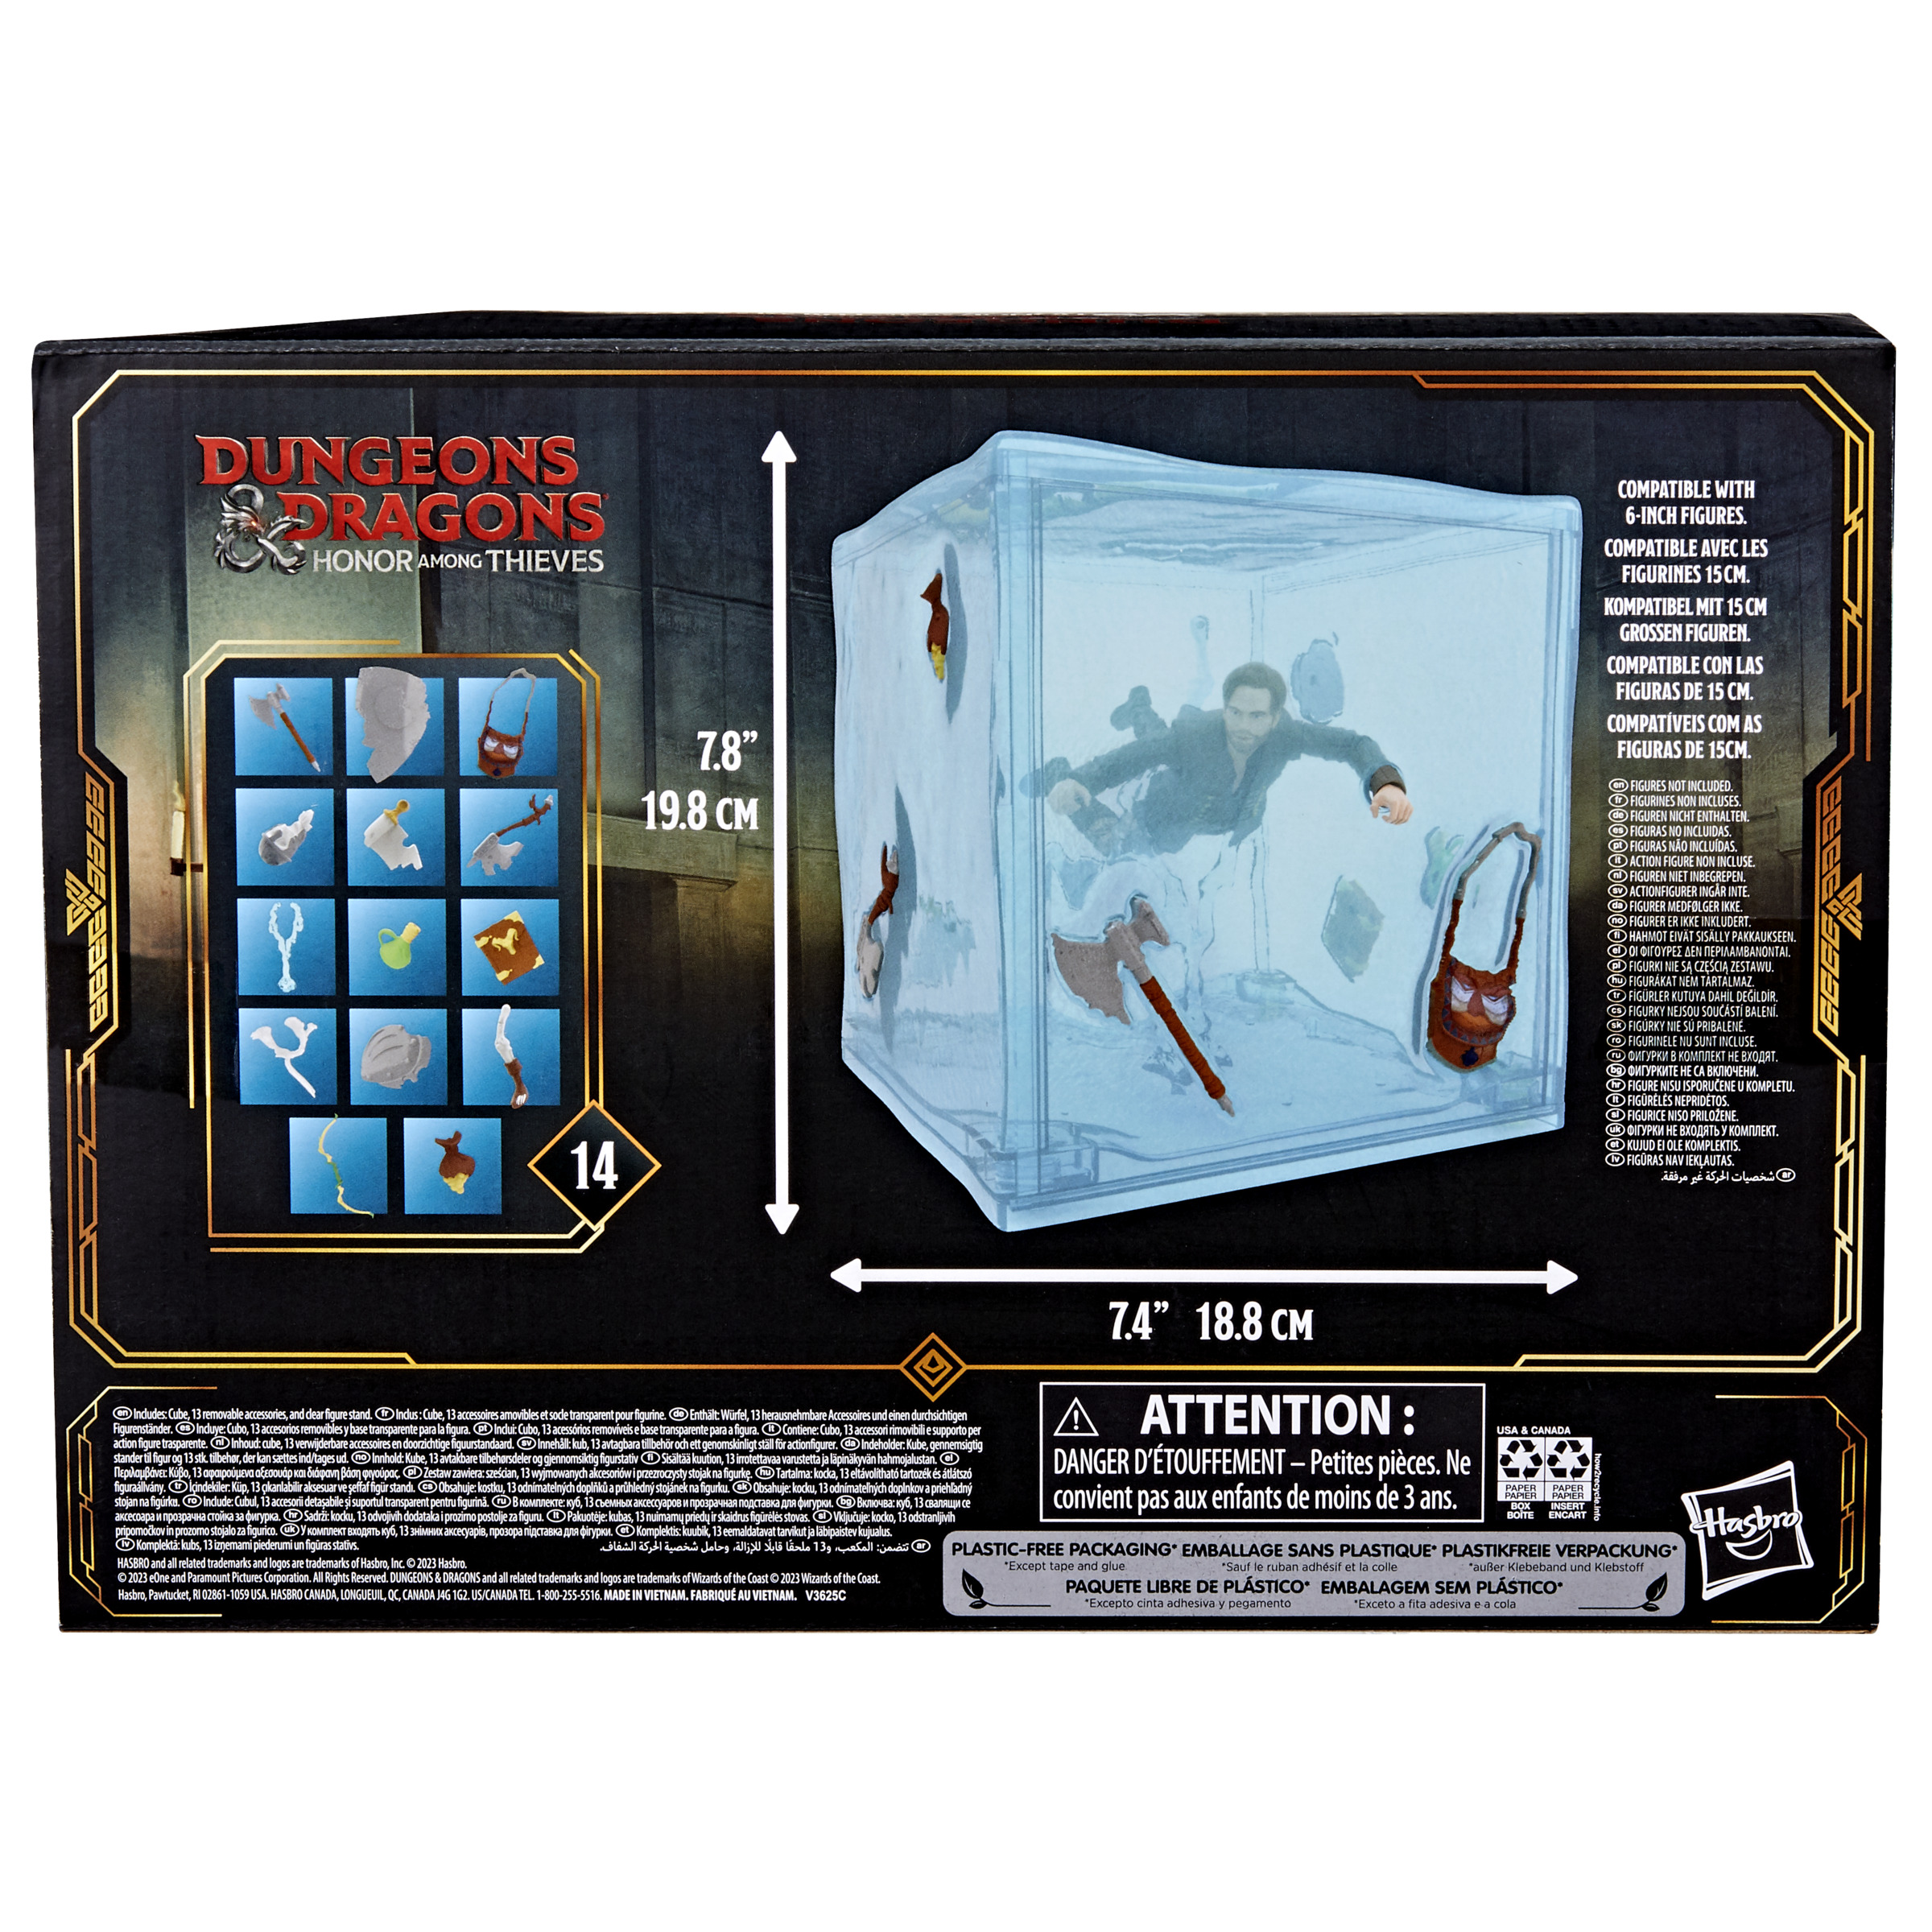 HASBRO Dungeons honor & Dragons: The of thieves Lernspiel